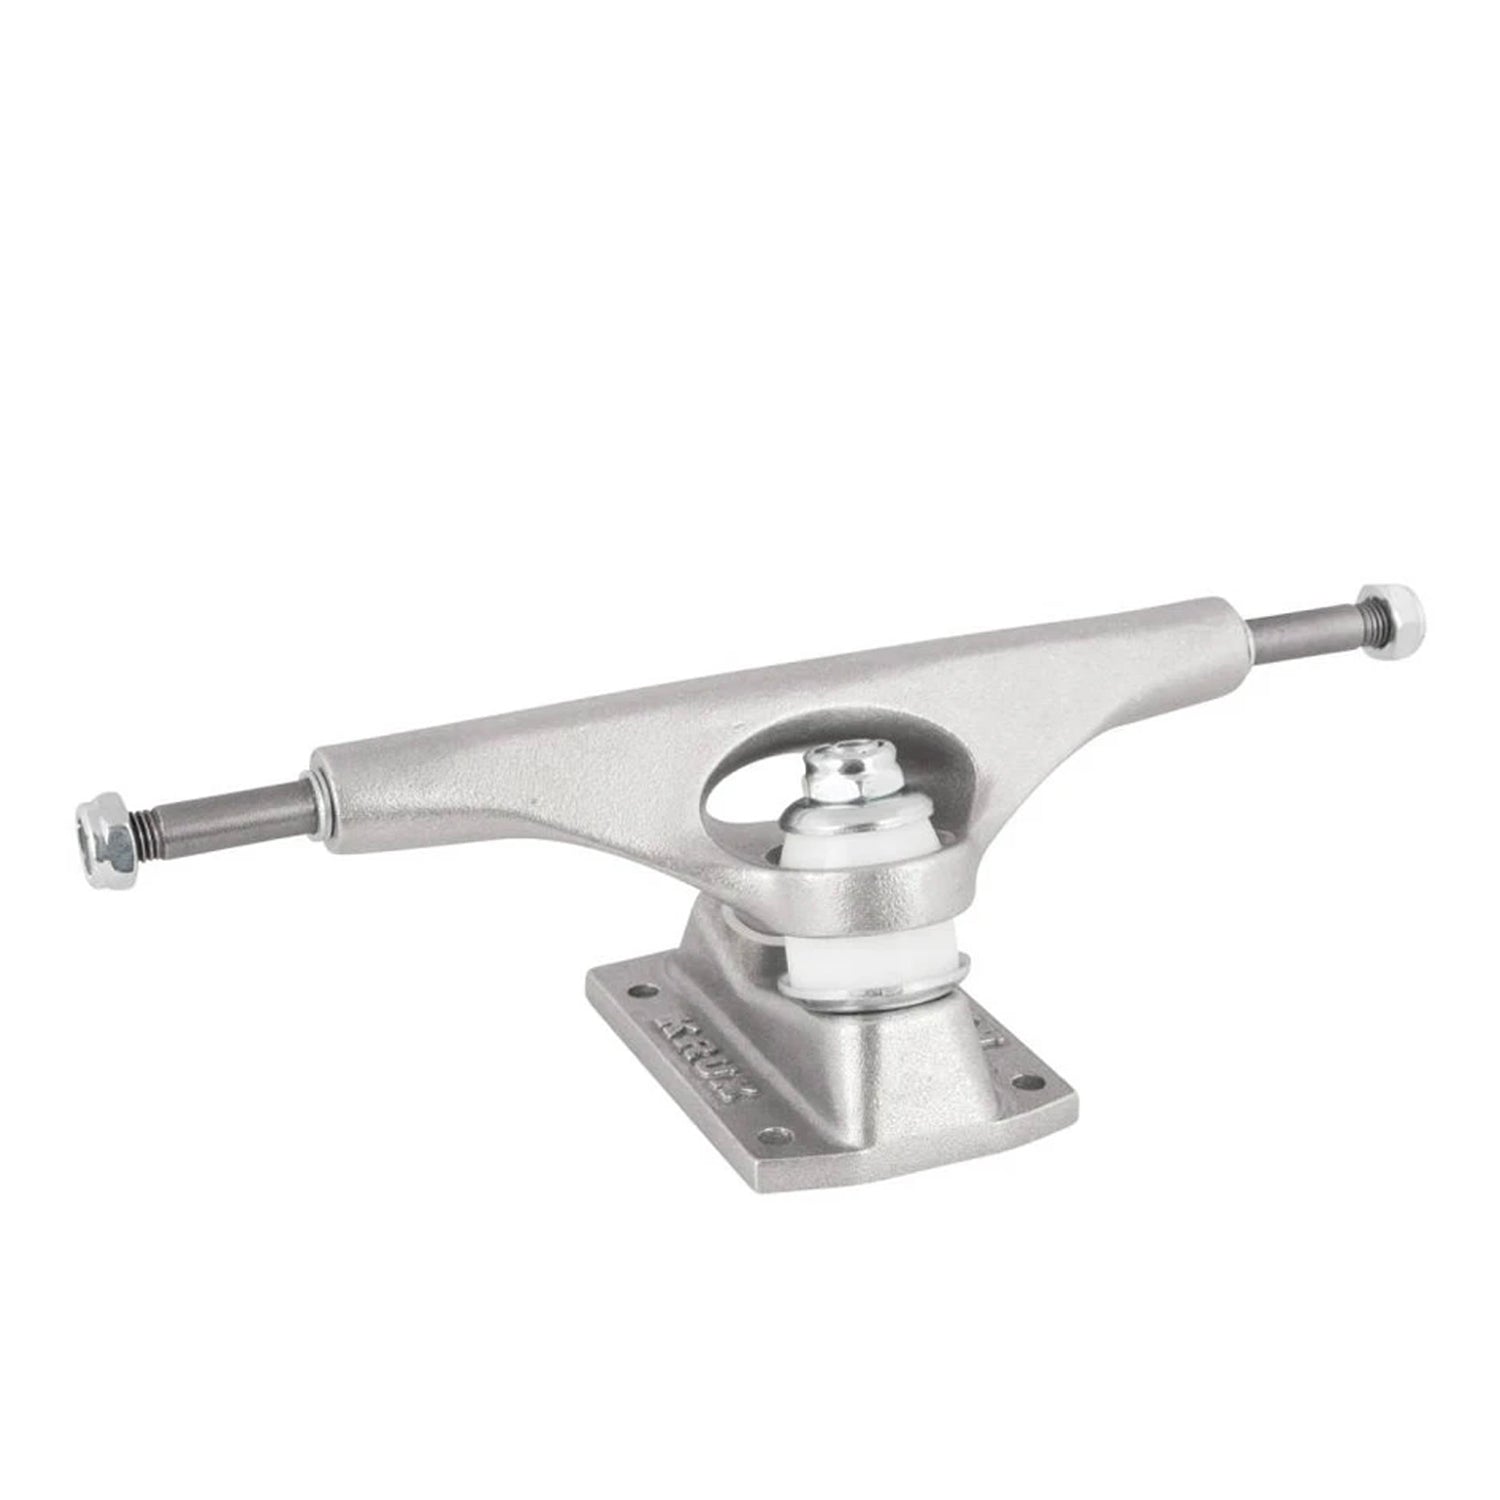 Krux Truck 8" - Silver (Sold as a pair) - Prime Delux Store